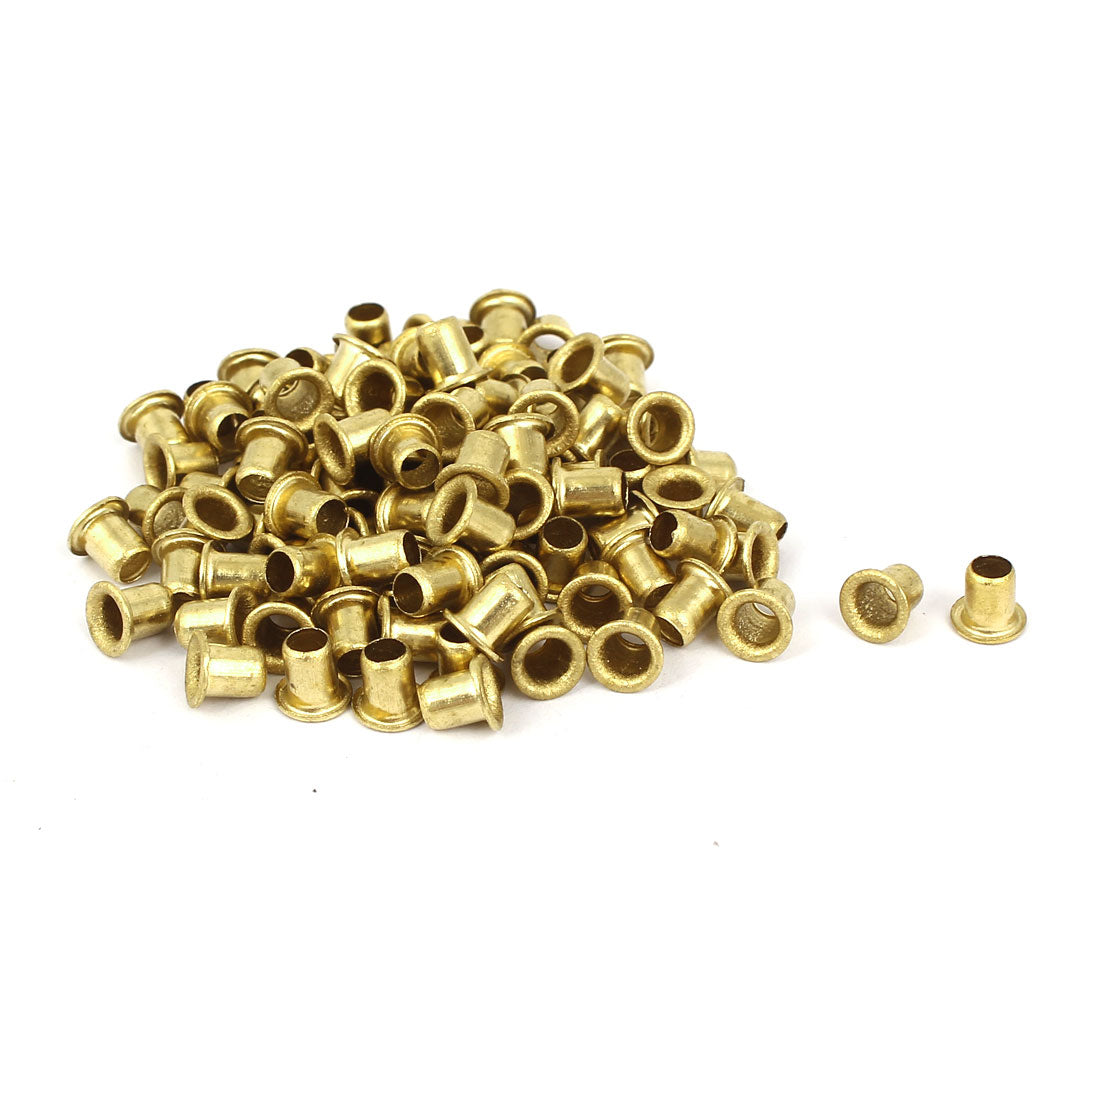 uxcell Uxcell 4mm x 5mm Double Sided Hollow Rivets Grommets Tool 100 Pcs